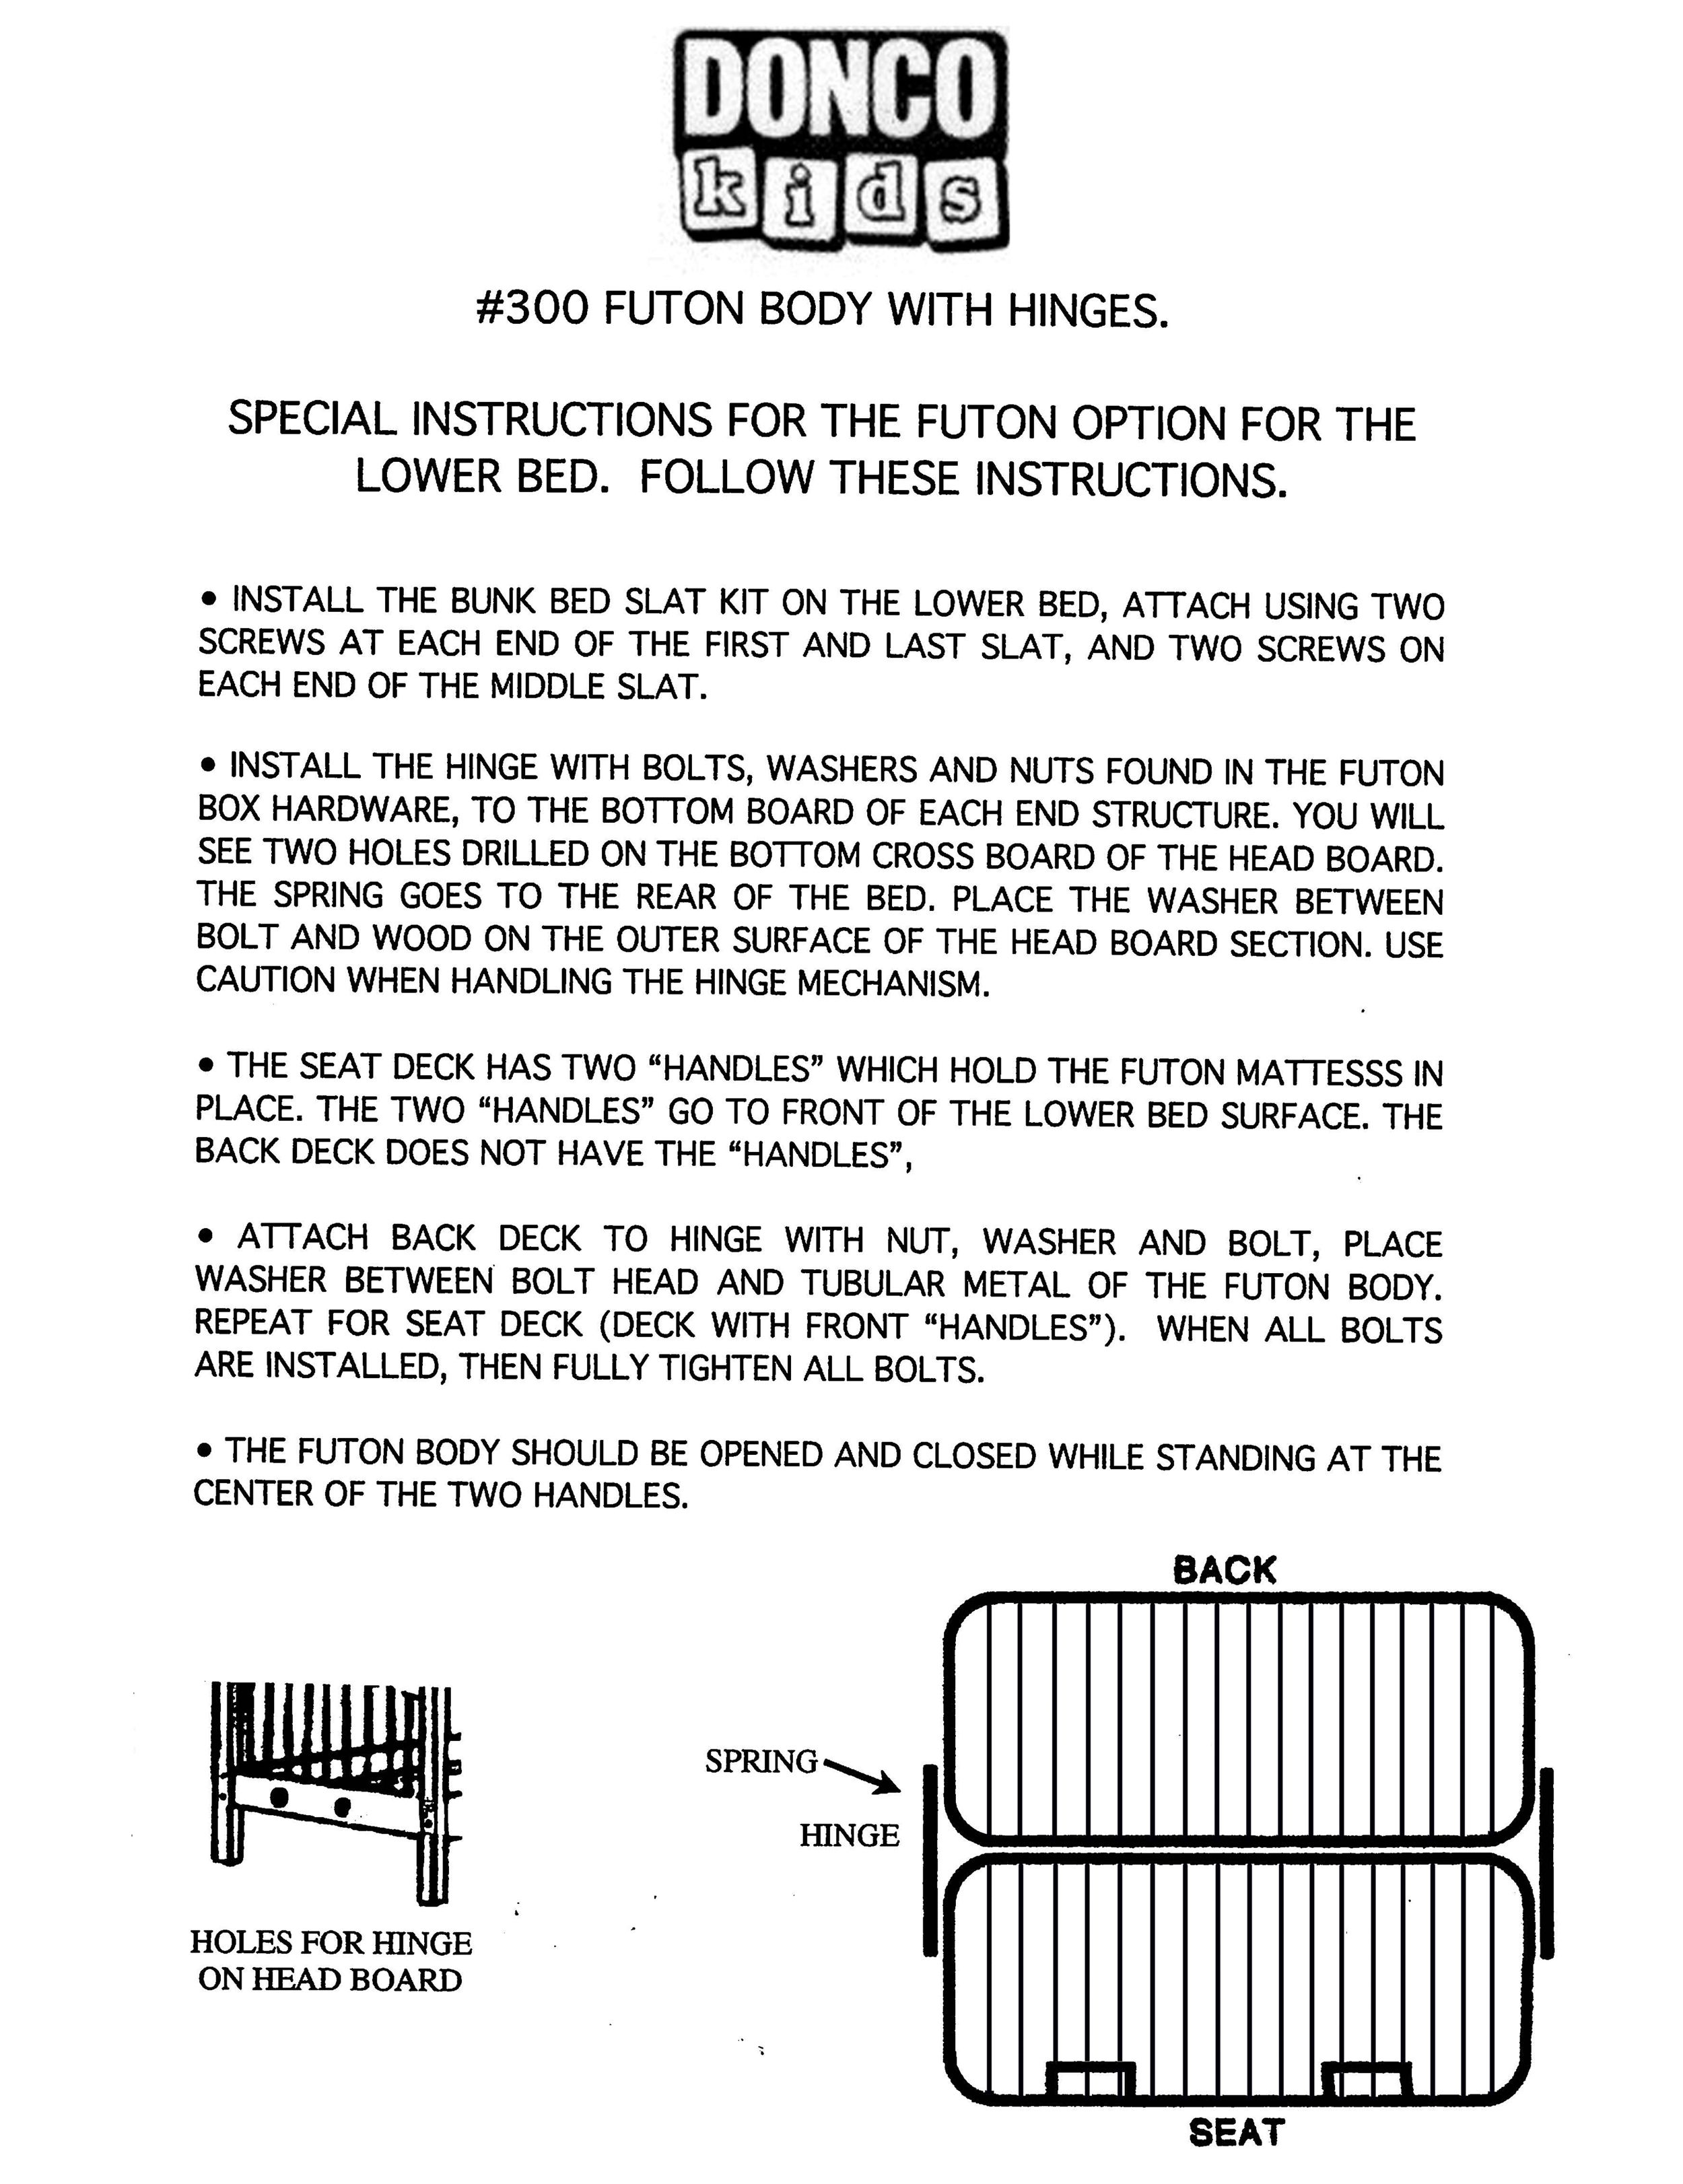 Assembly Instructions Donco Trading Co, Metal Futon Bunk Bed Parts